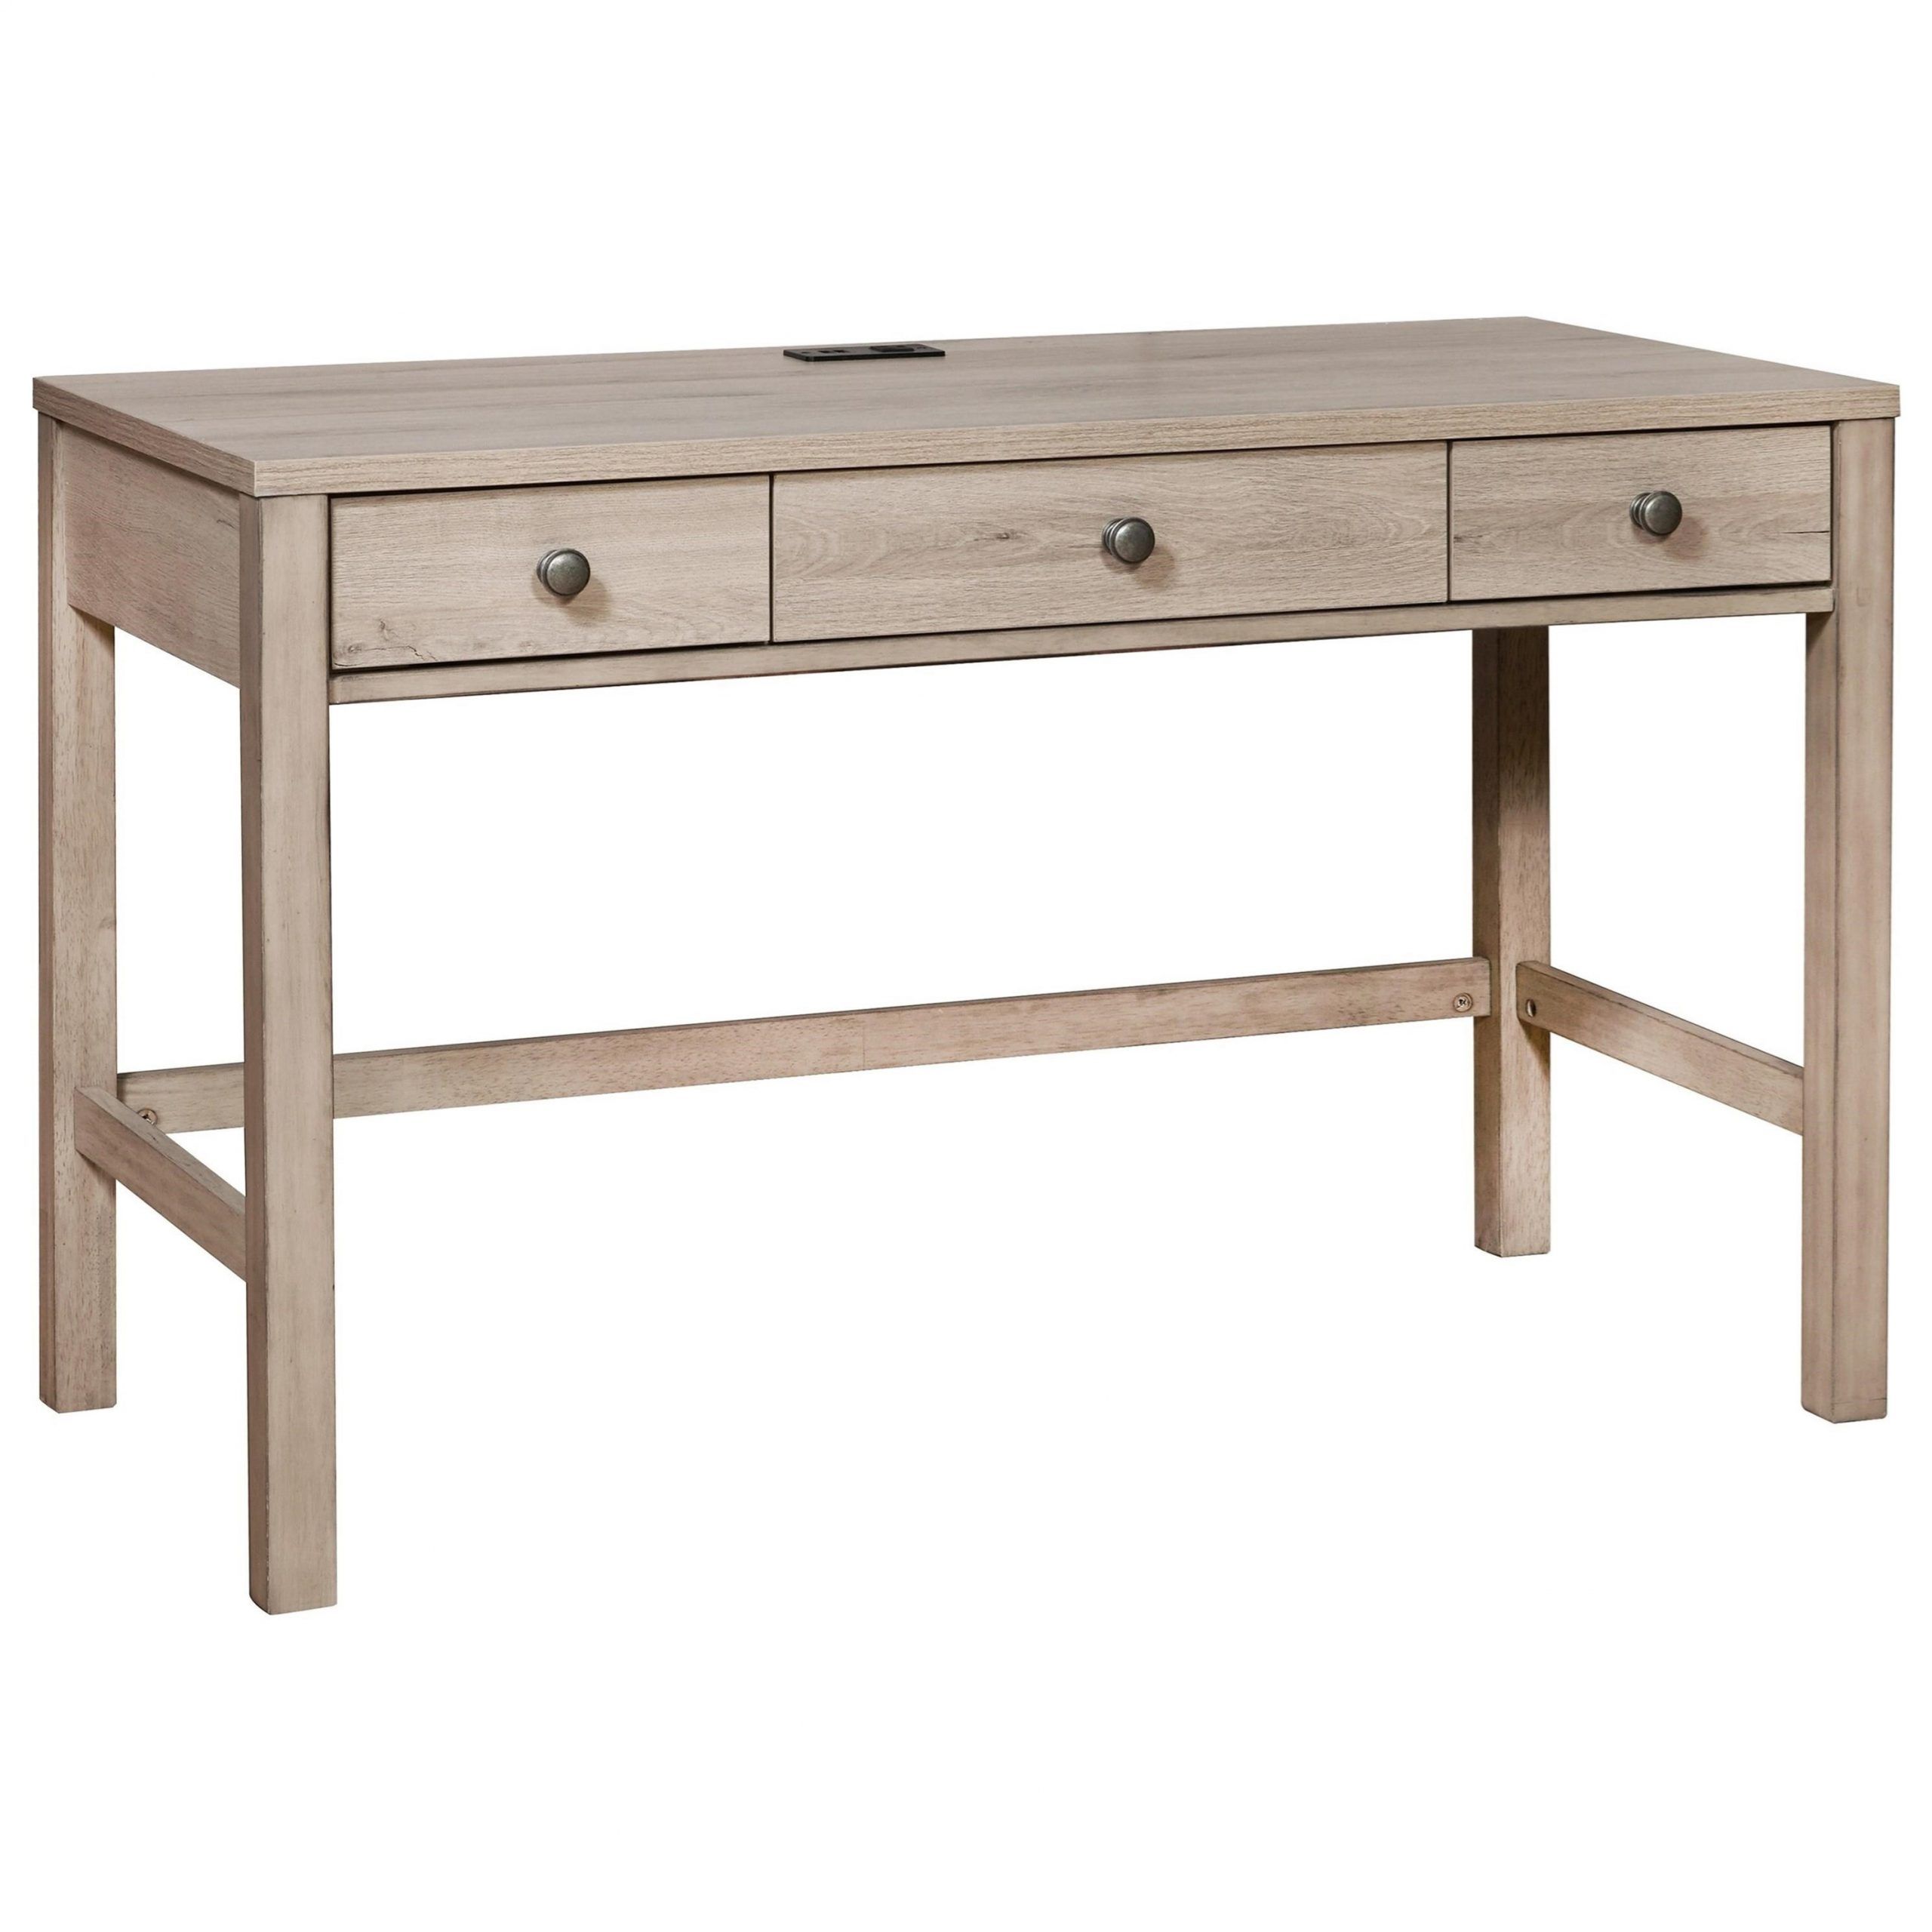 Samuel Lawrence Ash Creek 3 Drawer Desk With Usb Port | Morris Home In Acacia Wood Writing Desks With Usb Ports (View 1 of 15)